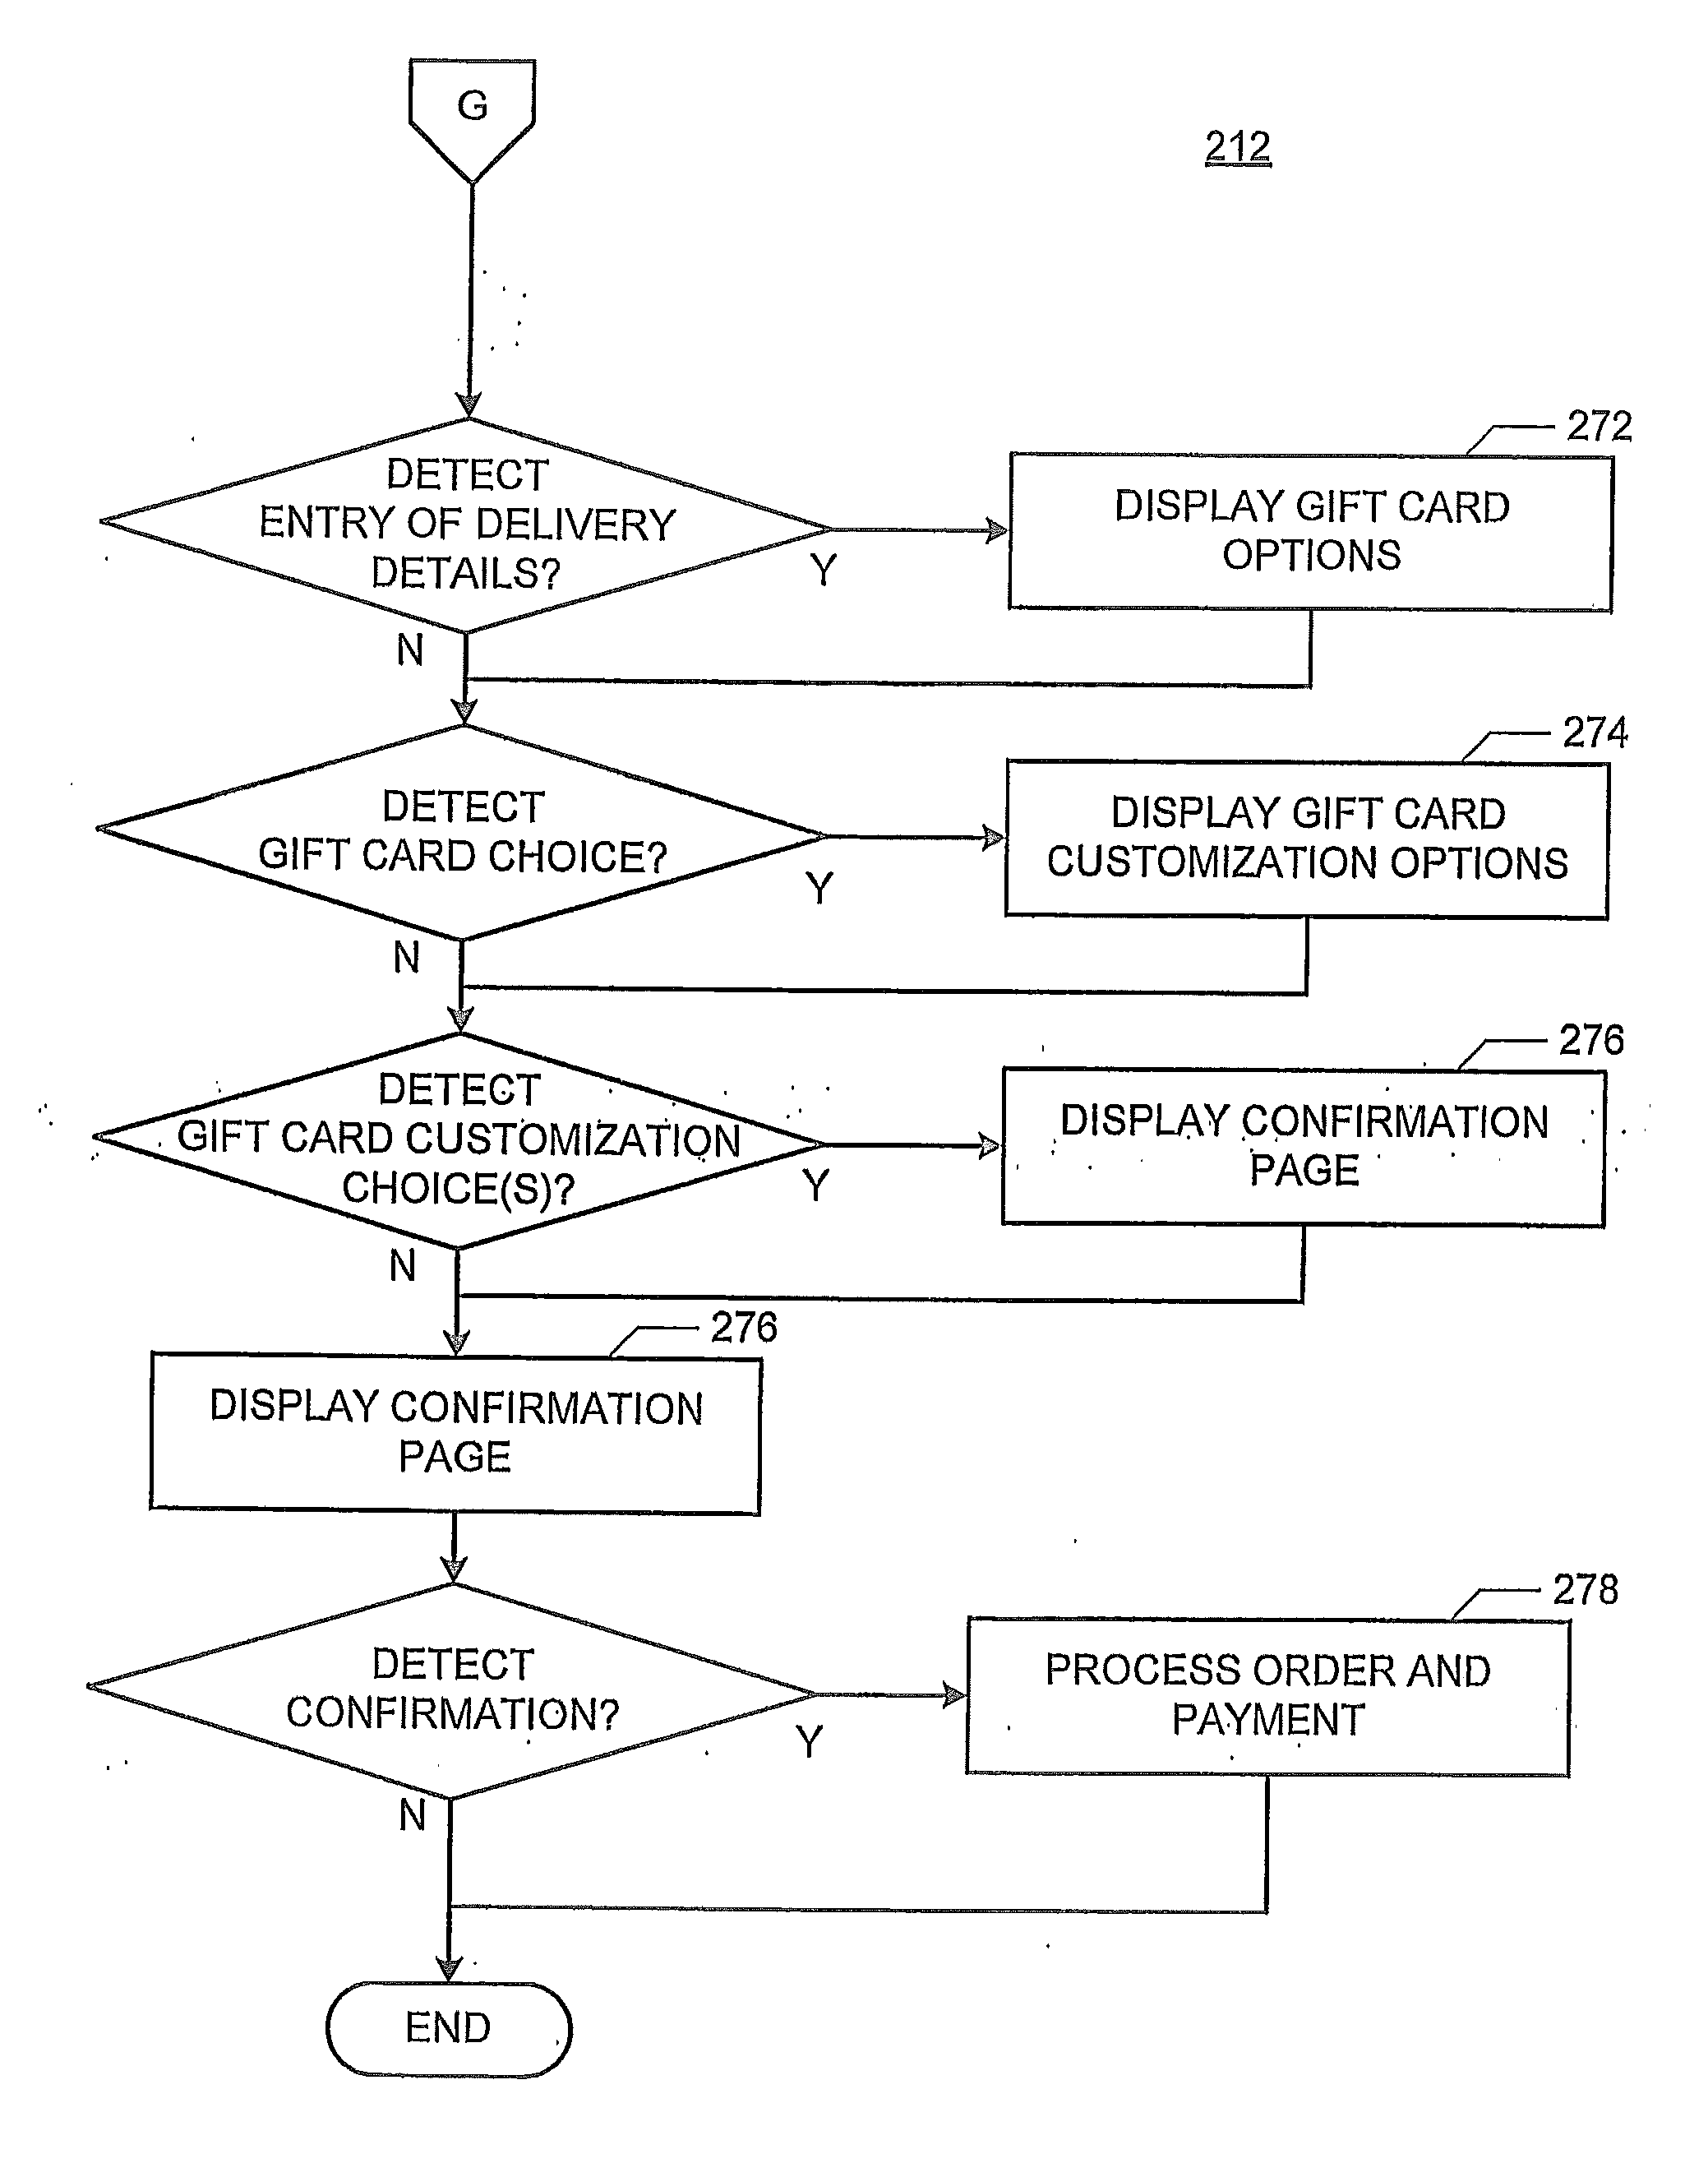 System and method for enabling a fundraising and contributions program using fundraising cards redeemable for branded stored-value cards